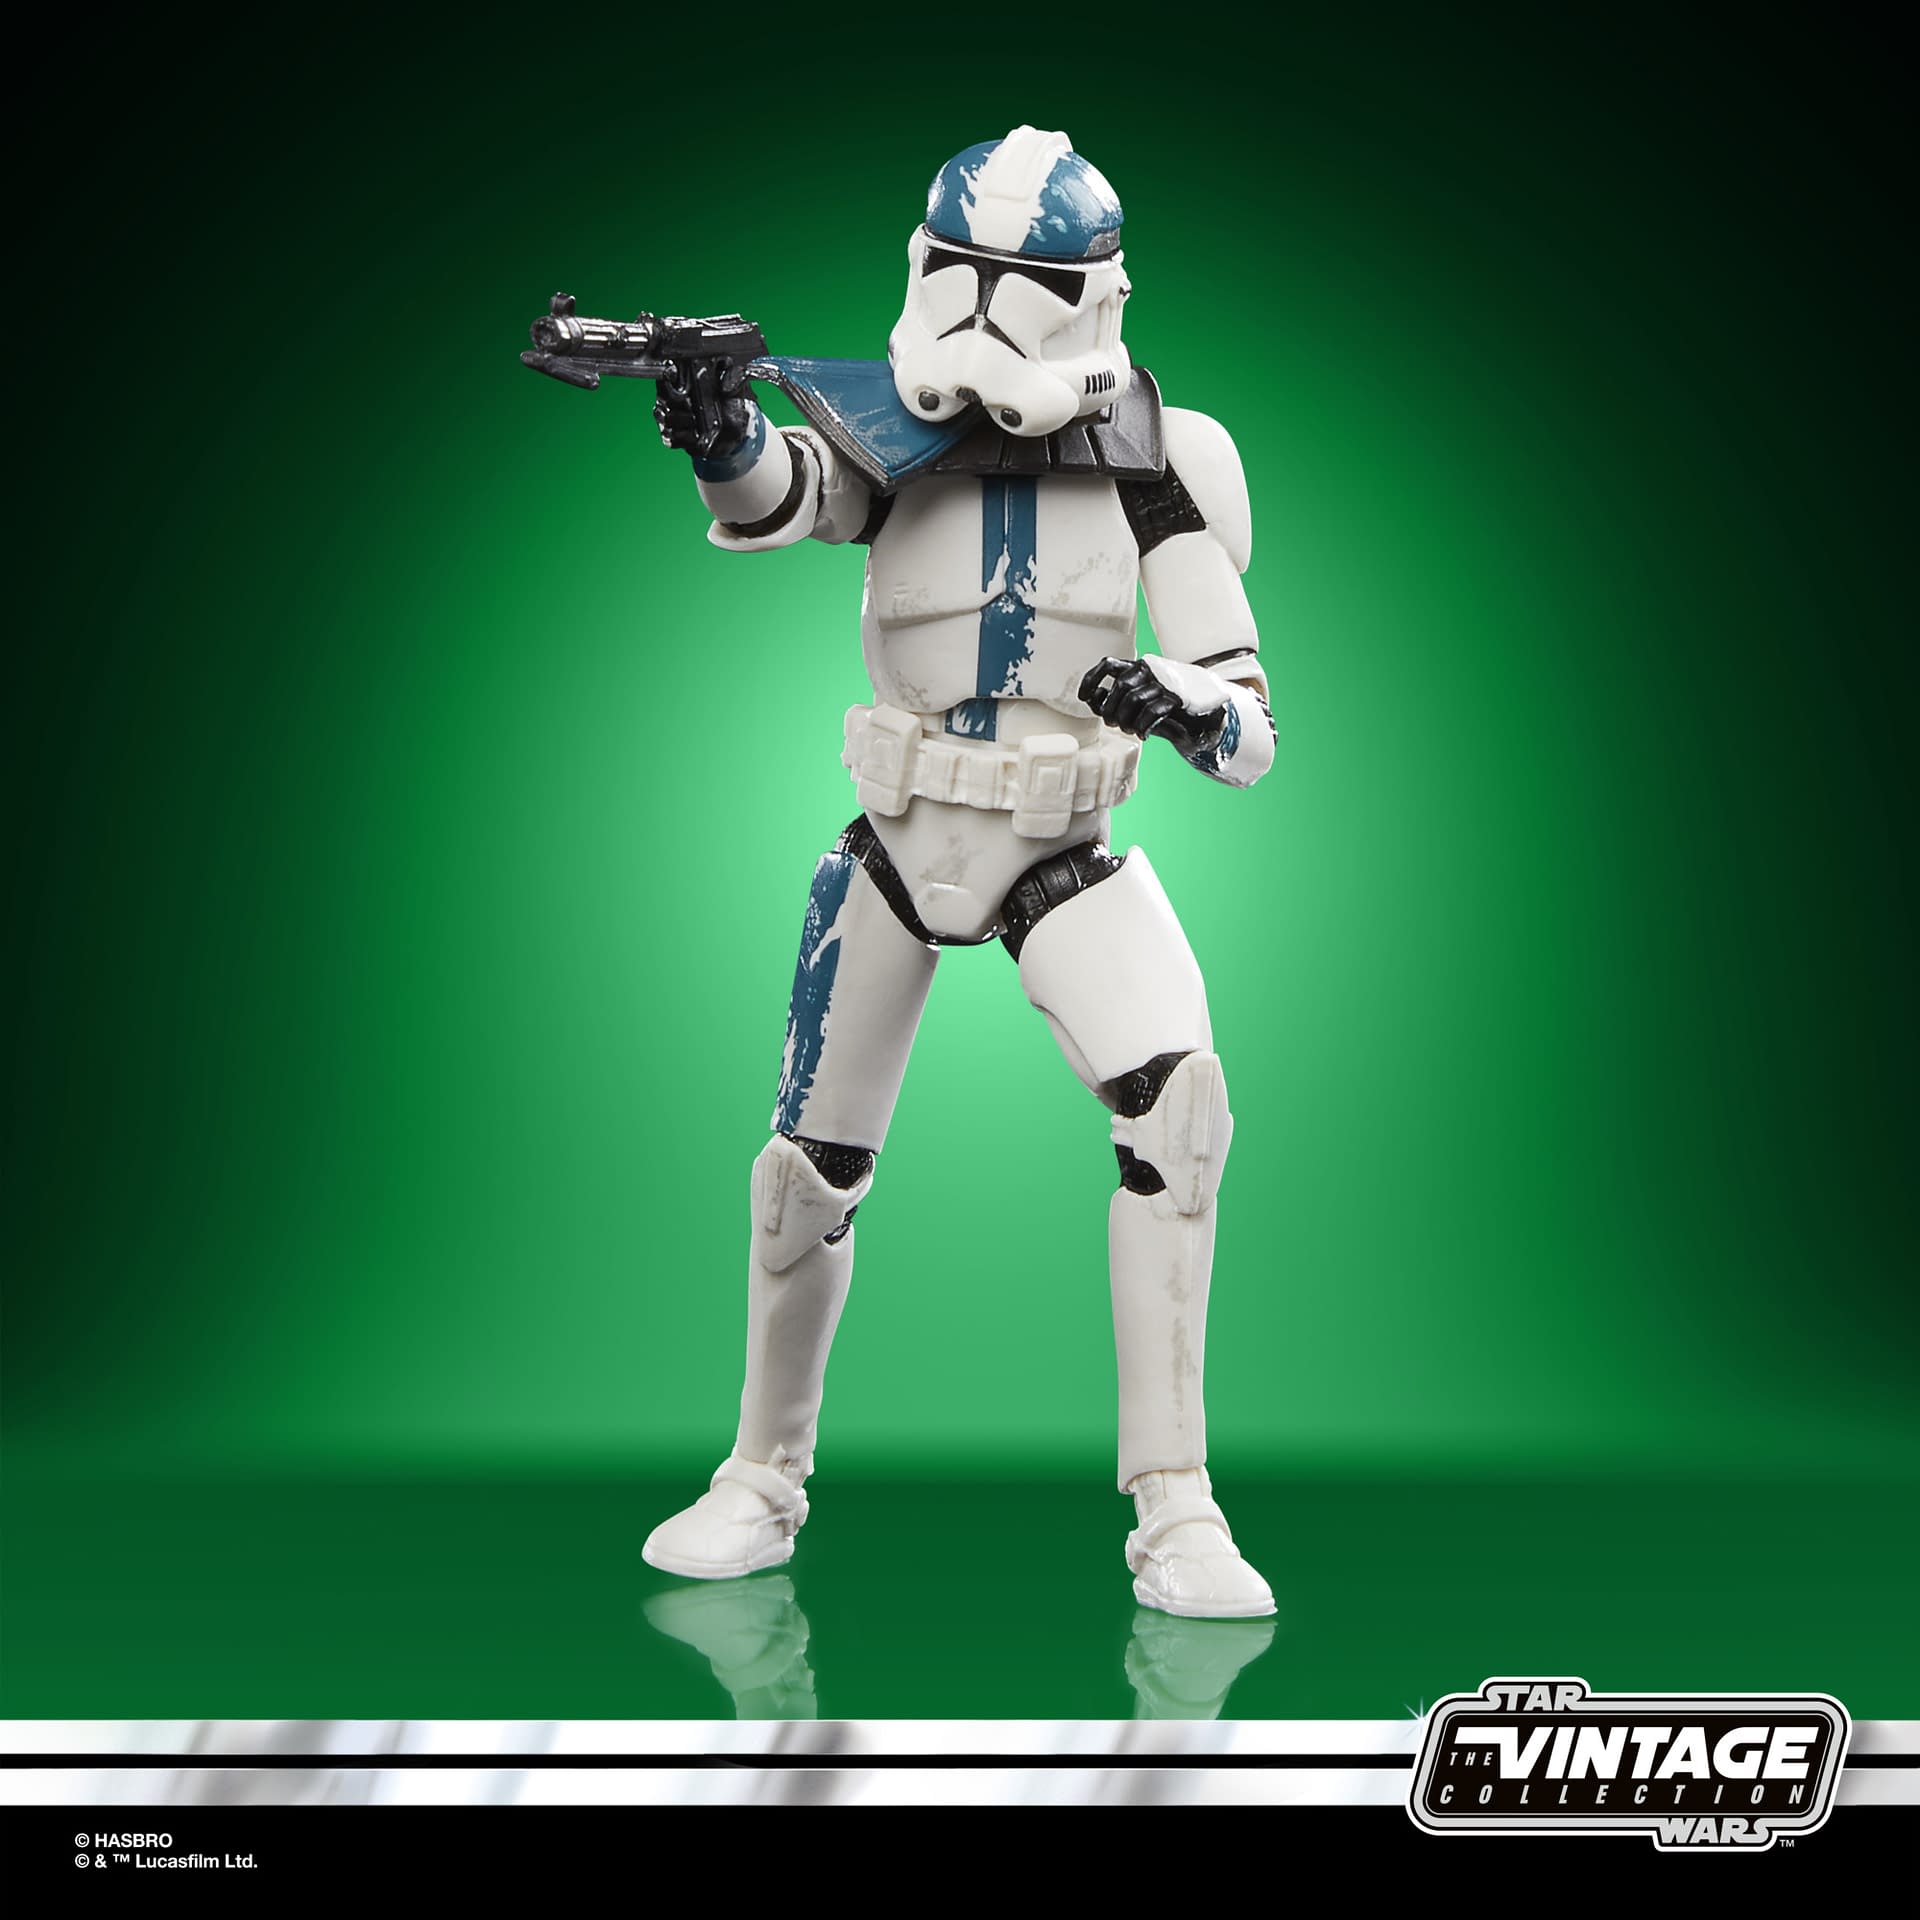 New Star Wars Clone Troopers Figures Coming Soon from Hasbro 